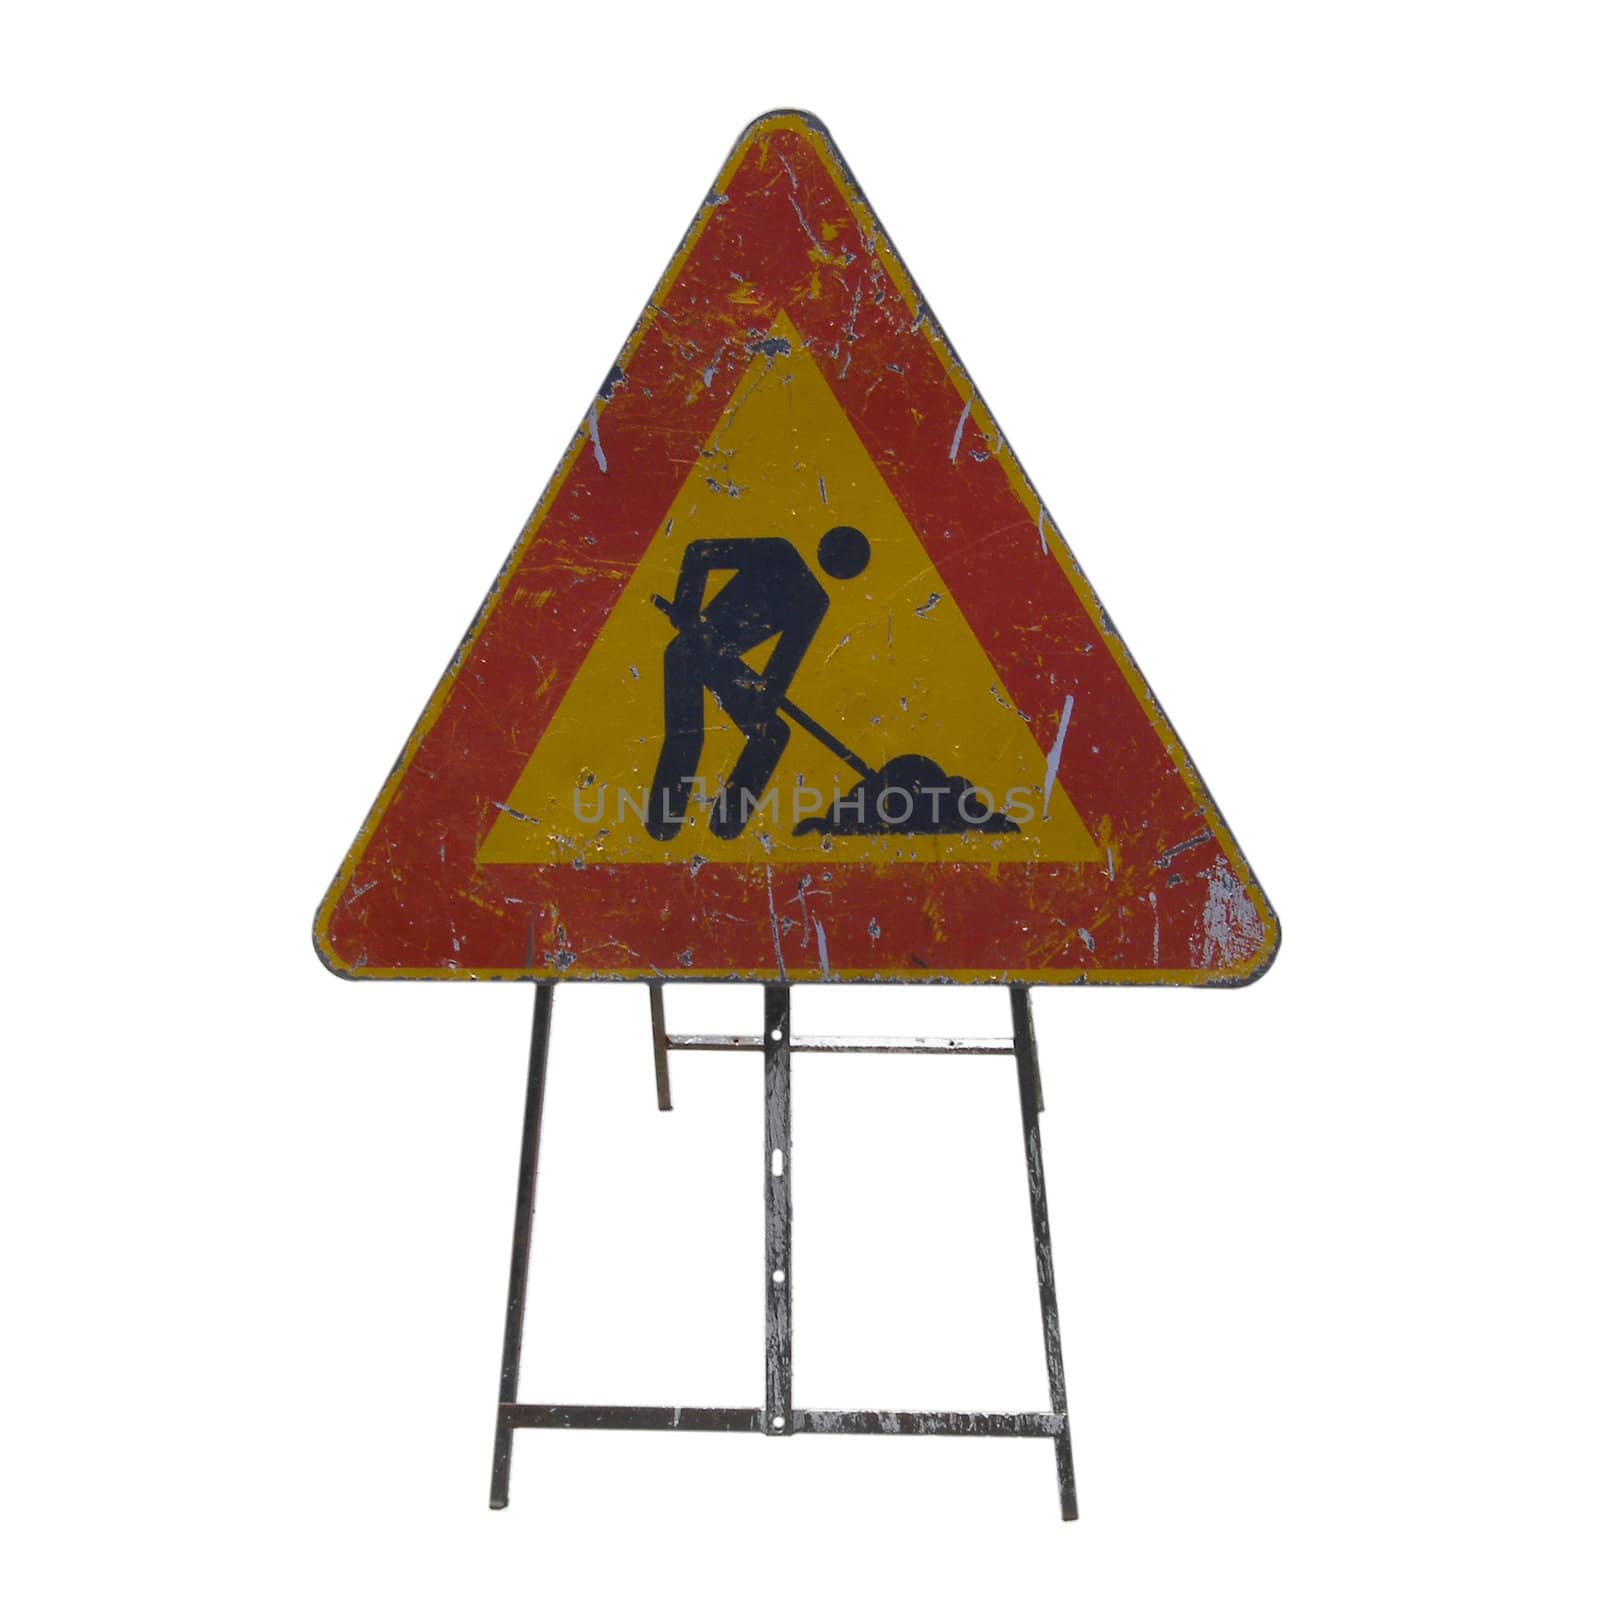 Road work sign by claudiodivizia